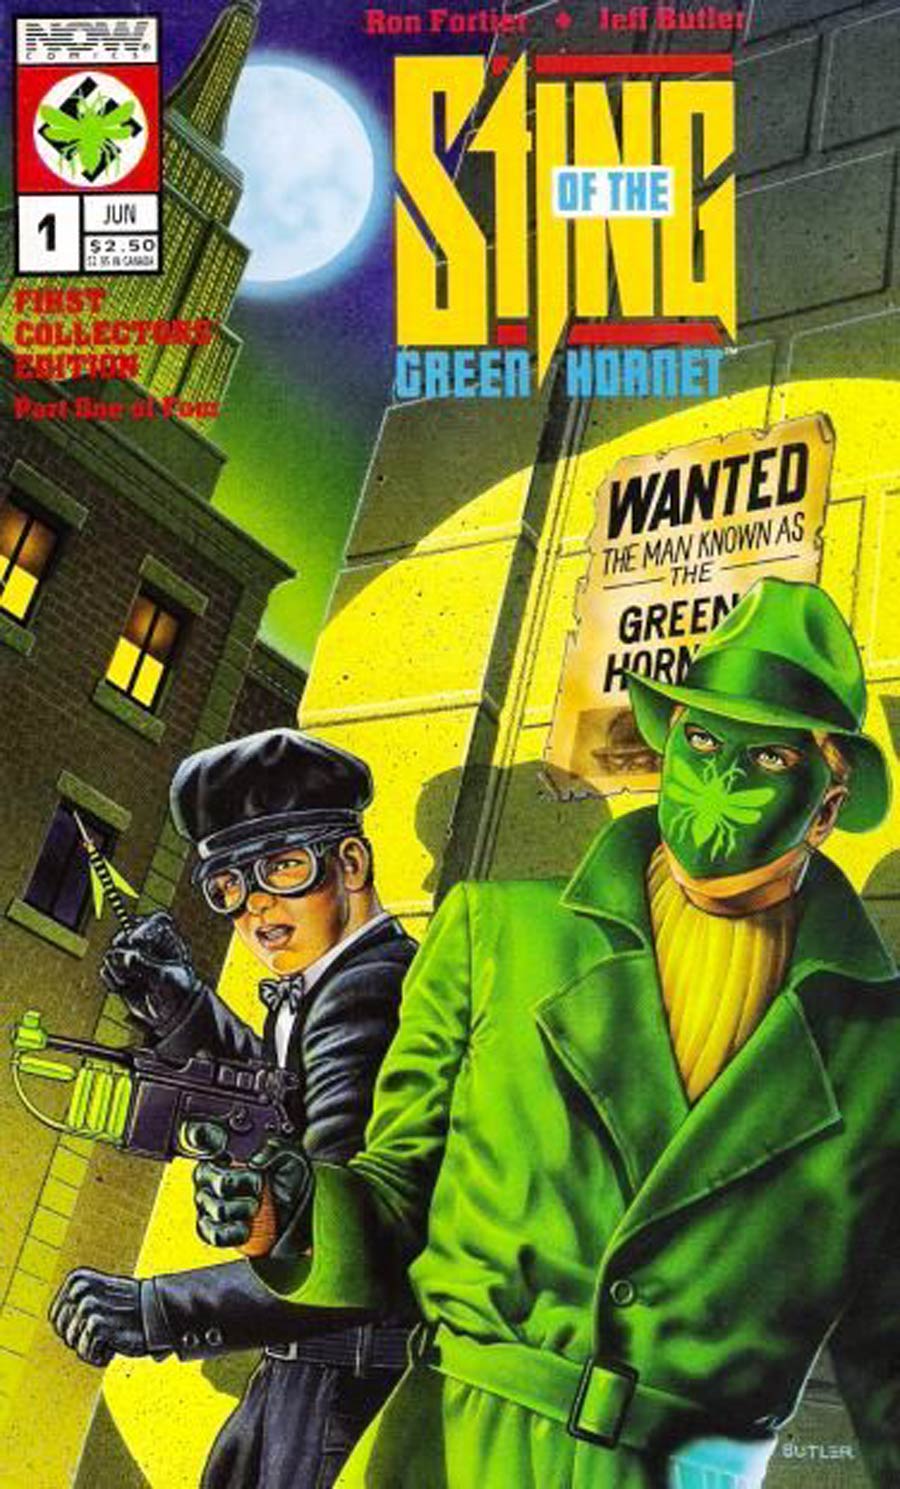 Sting Of The Green Hornet #1 Cover B Standard Edition